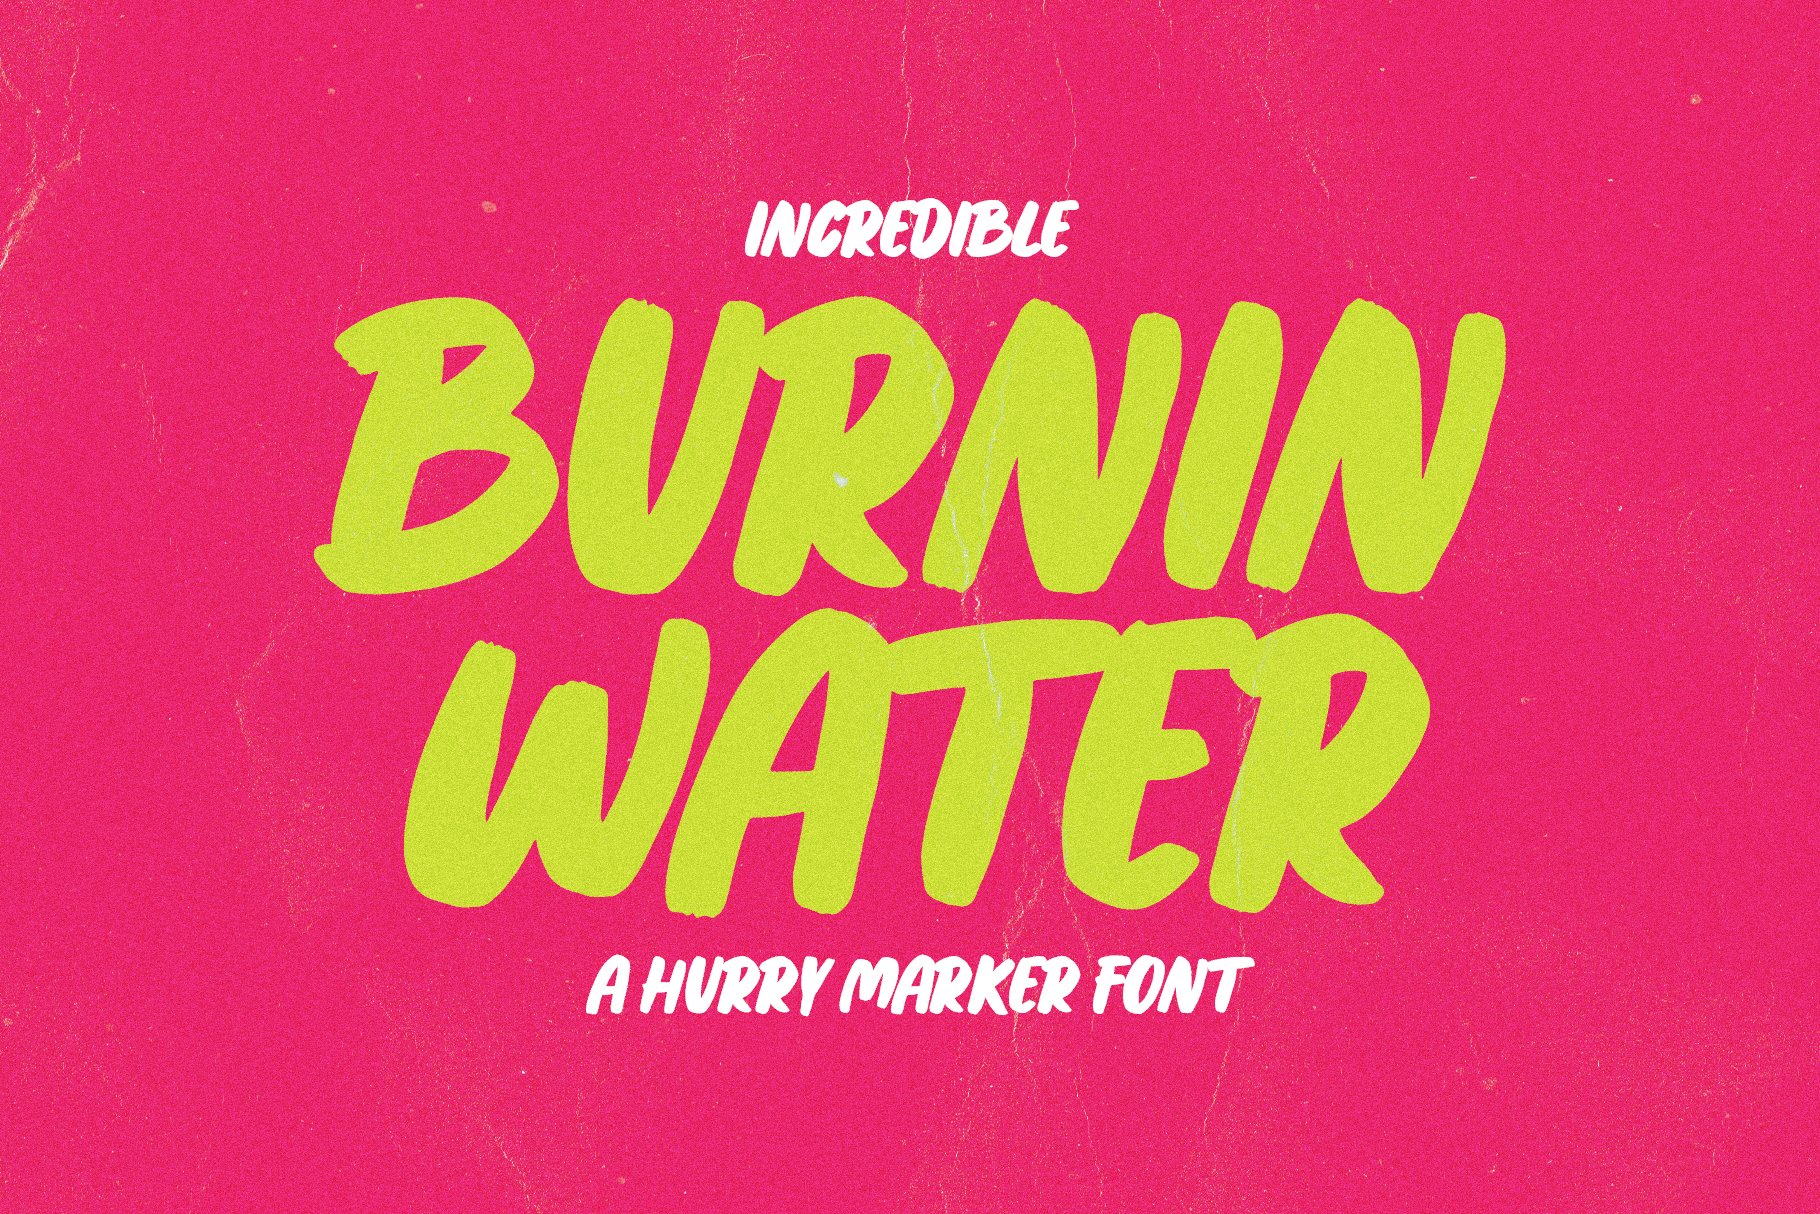 Burning Water / marker font cover image.